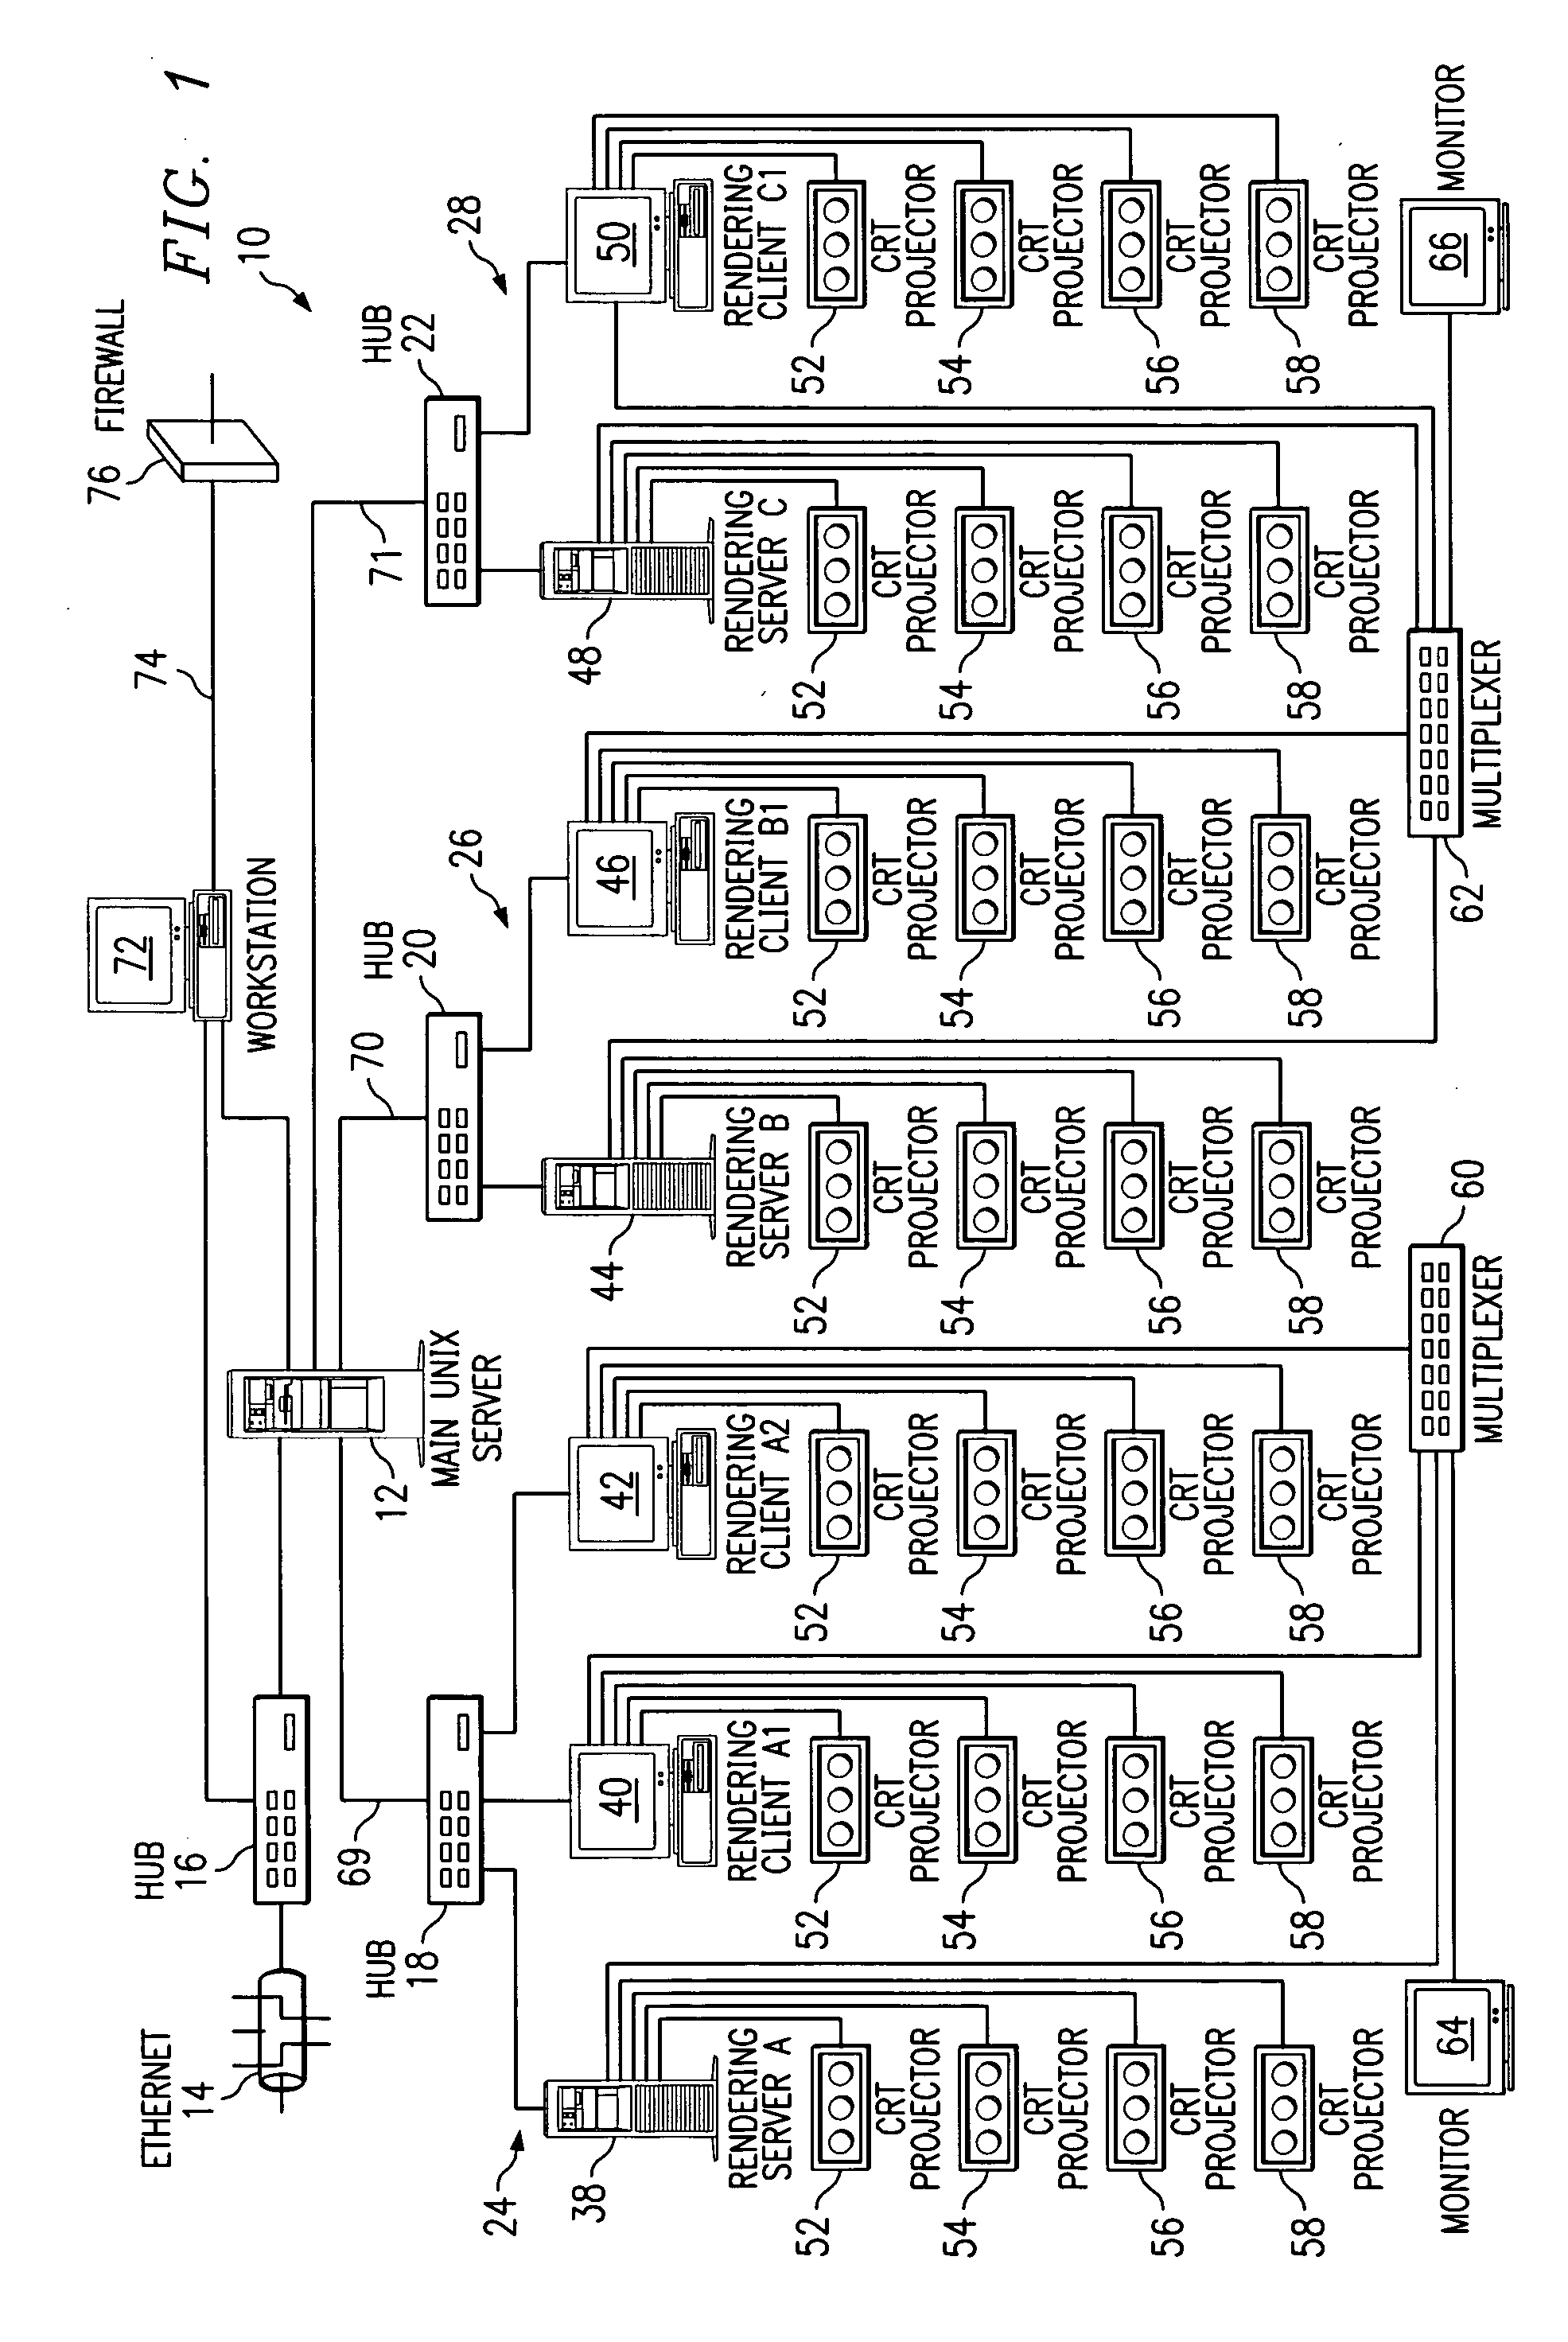 Autostereoscopic display system